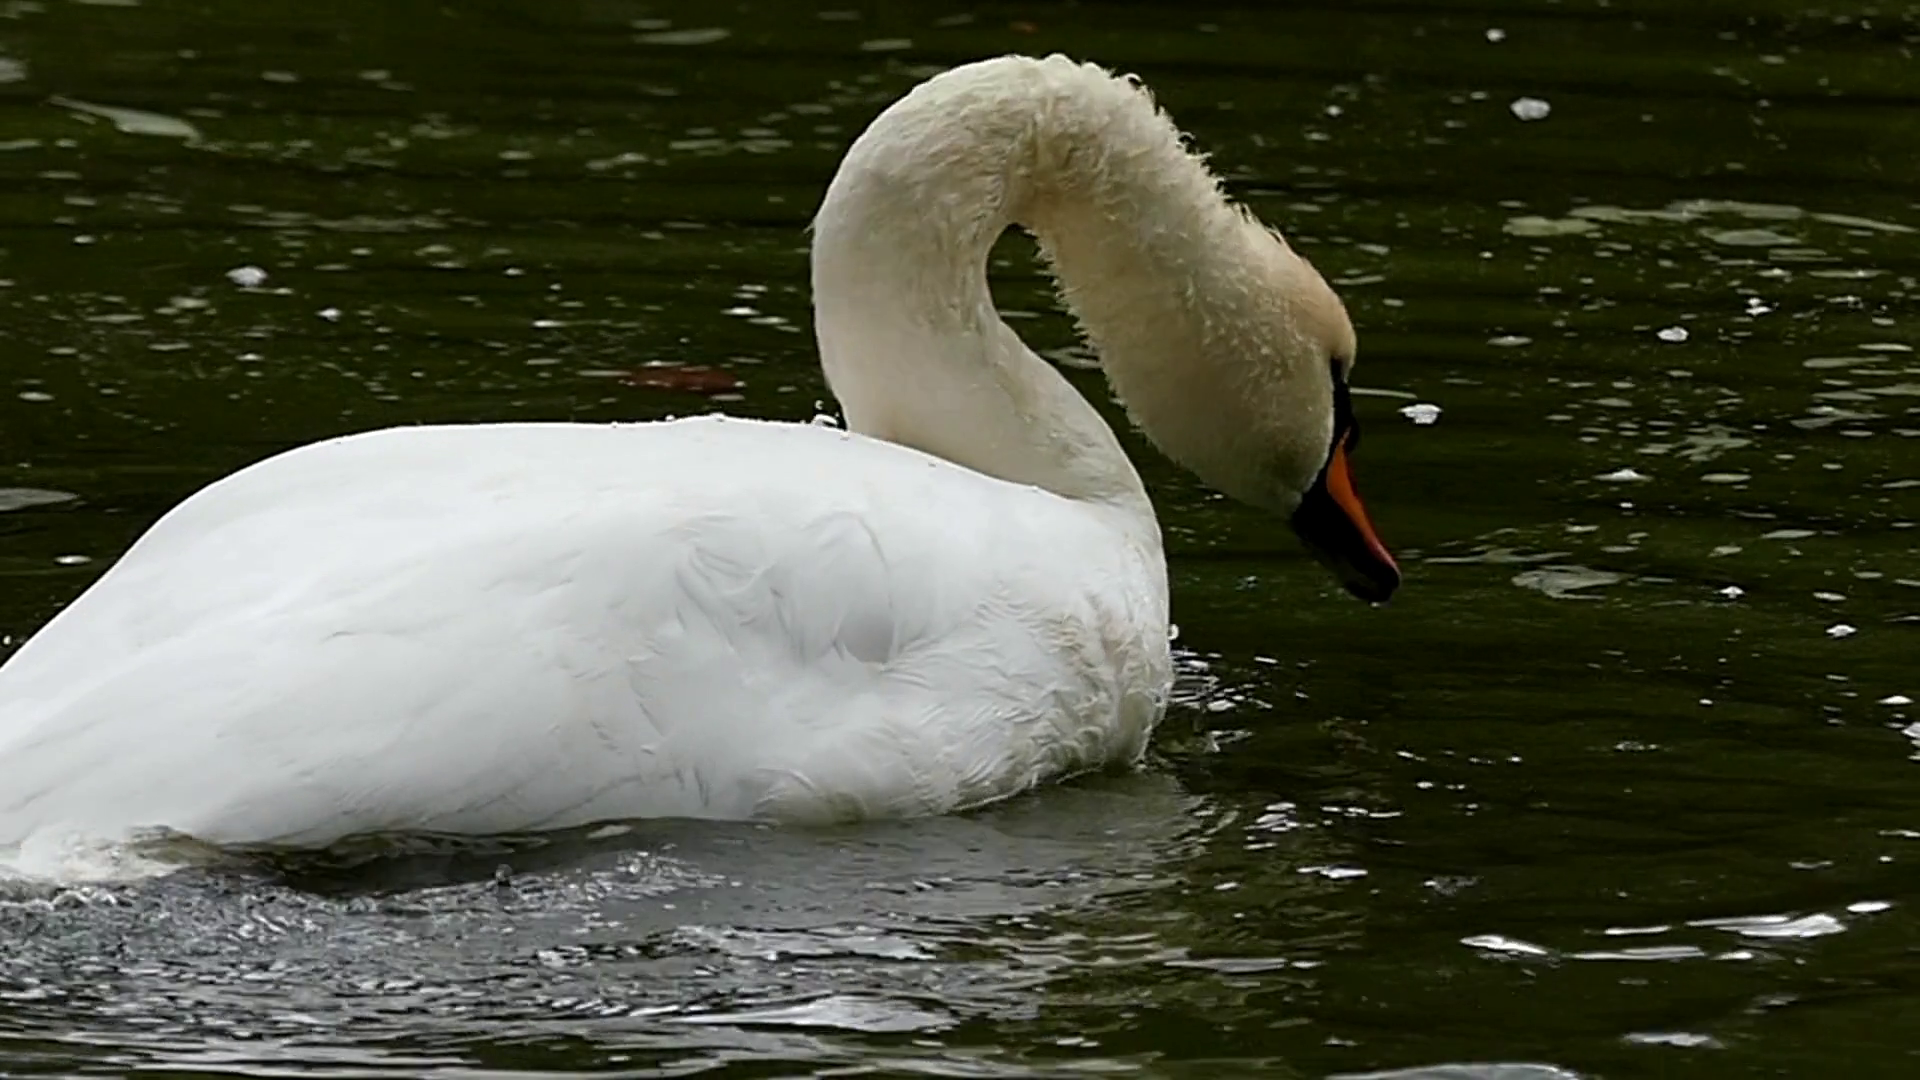 Amazing Swan in Slow Motion. the Swan Neck Pulls and Dives Under the ...